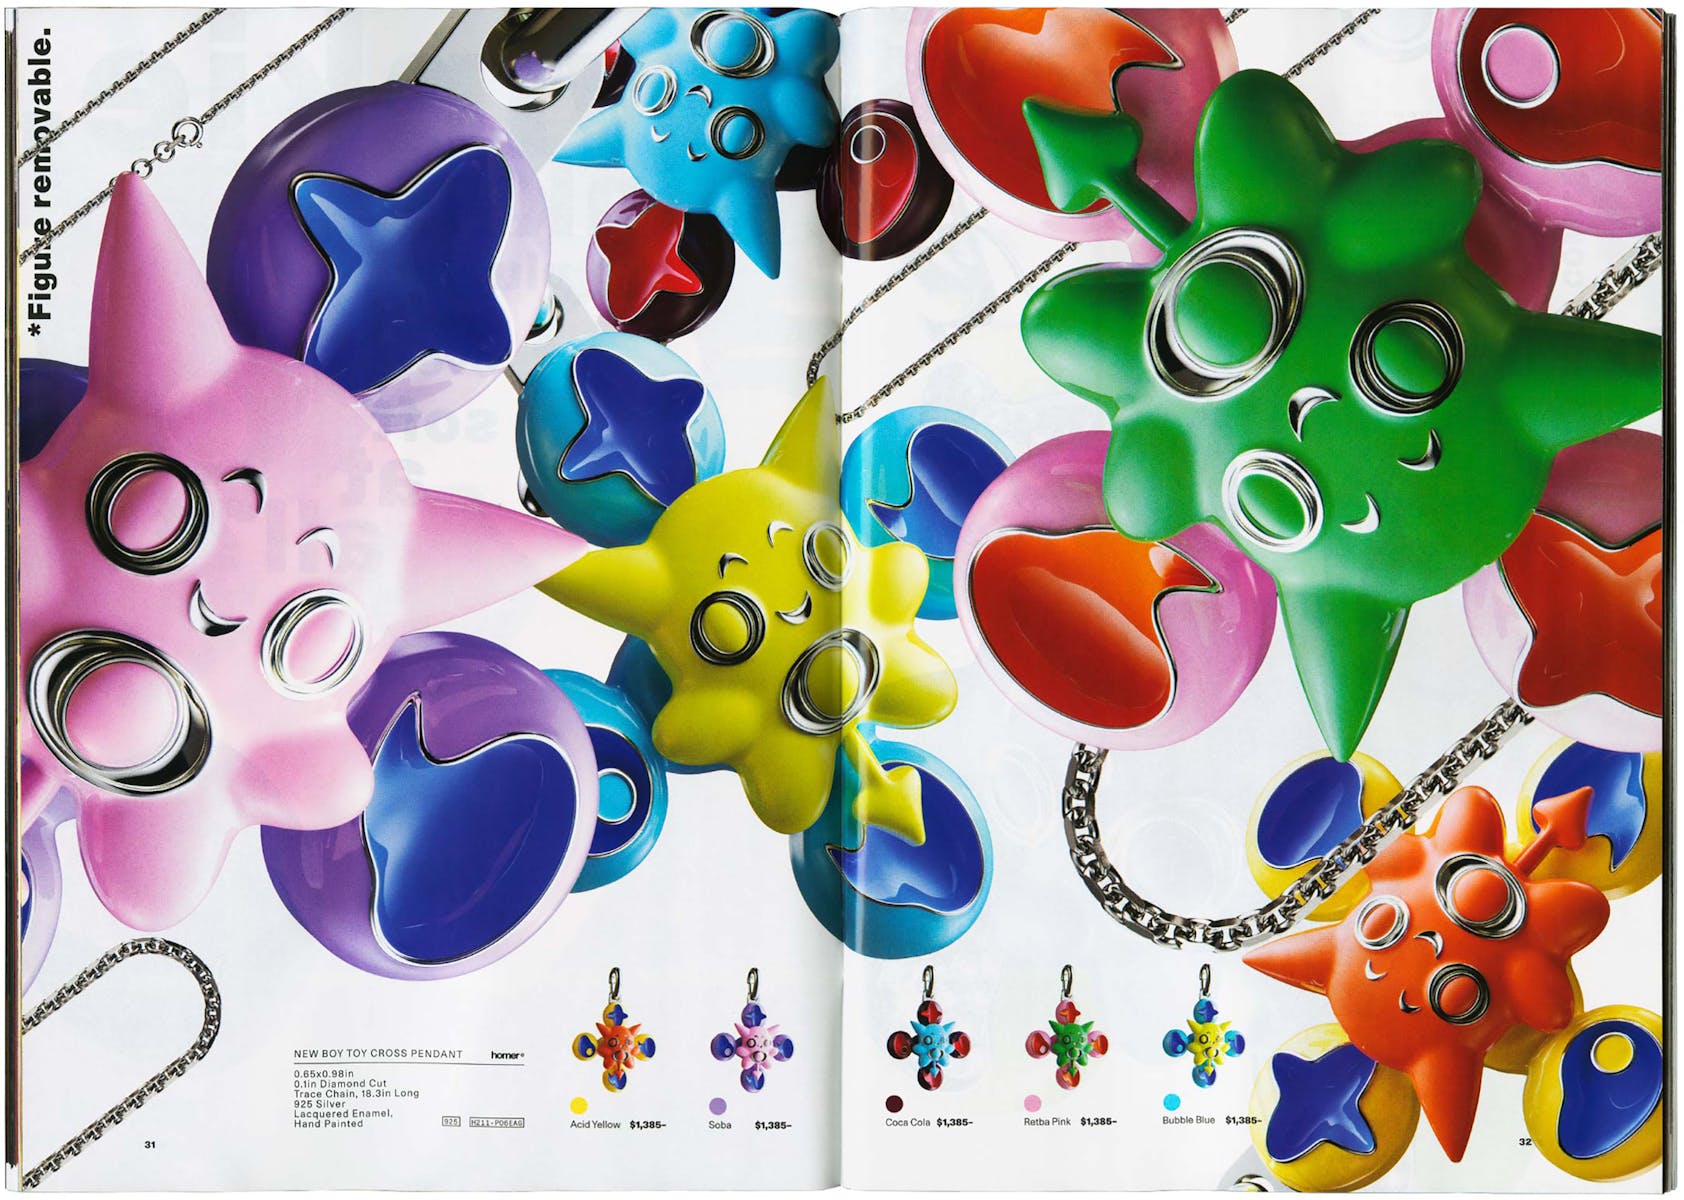 Magazine spread featuring multicolored blog shapes and jewelry